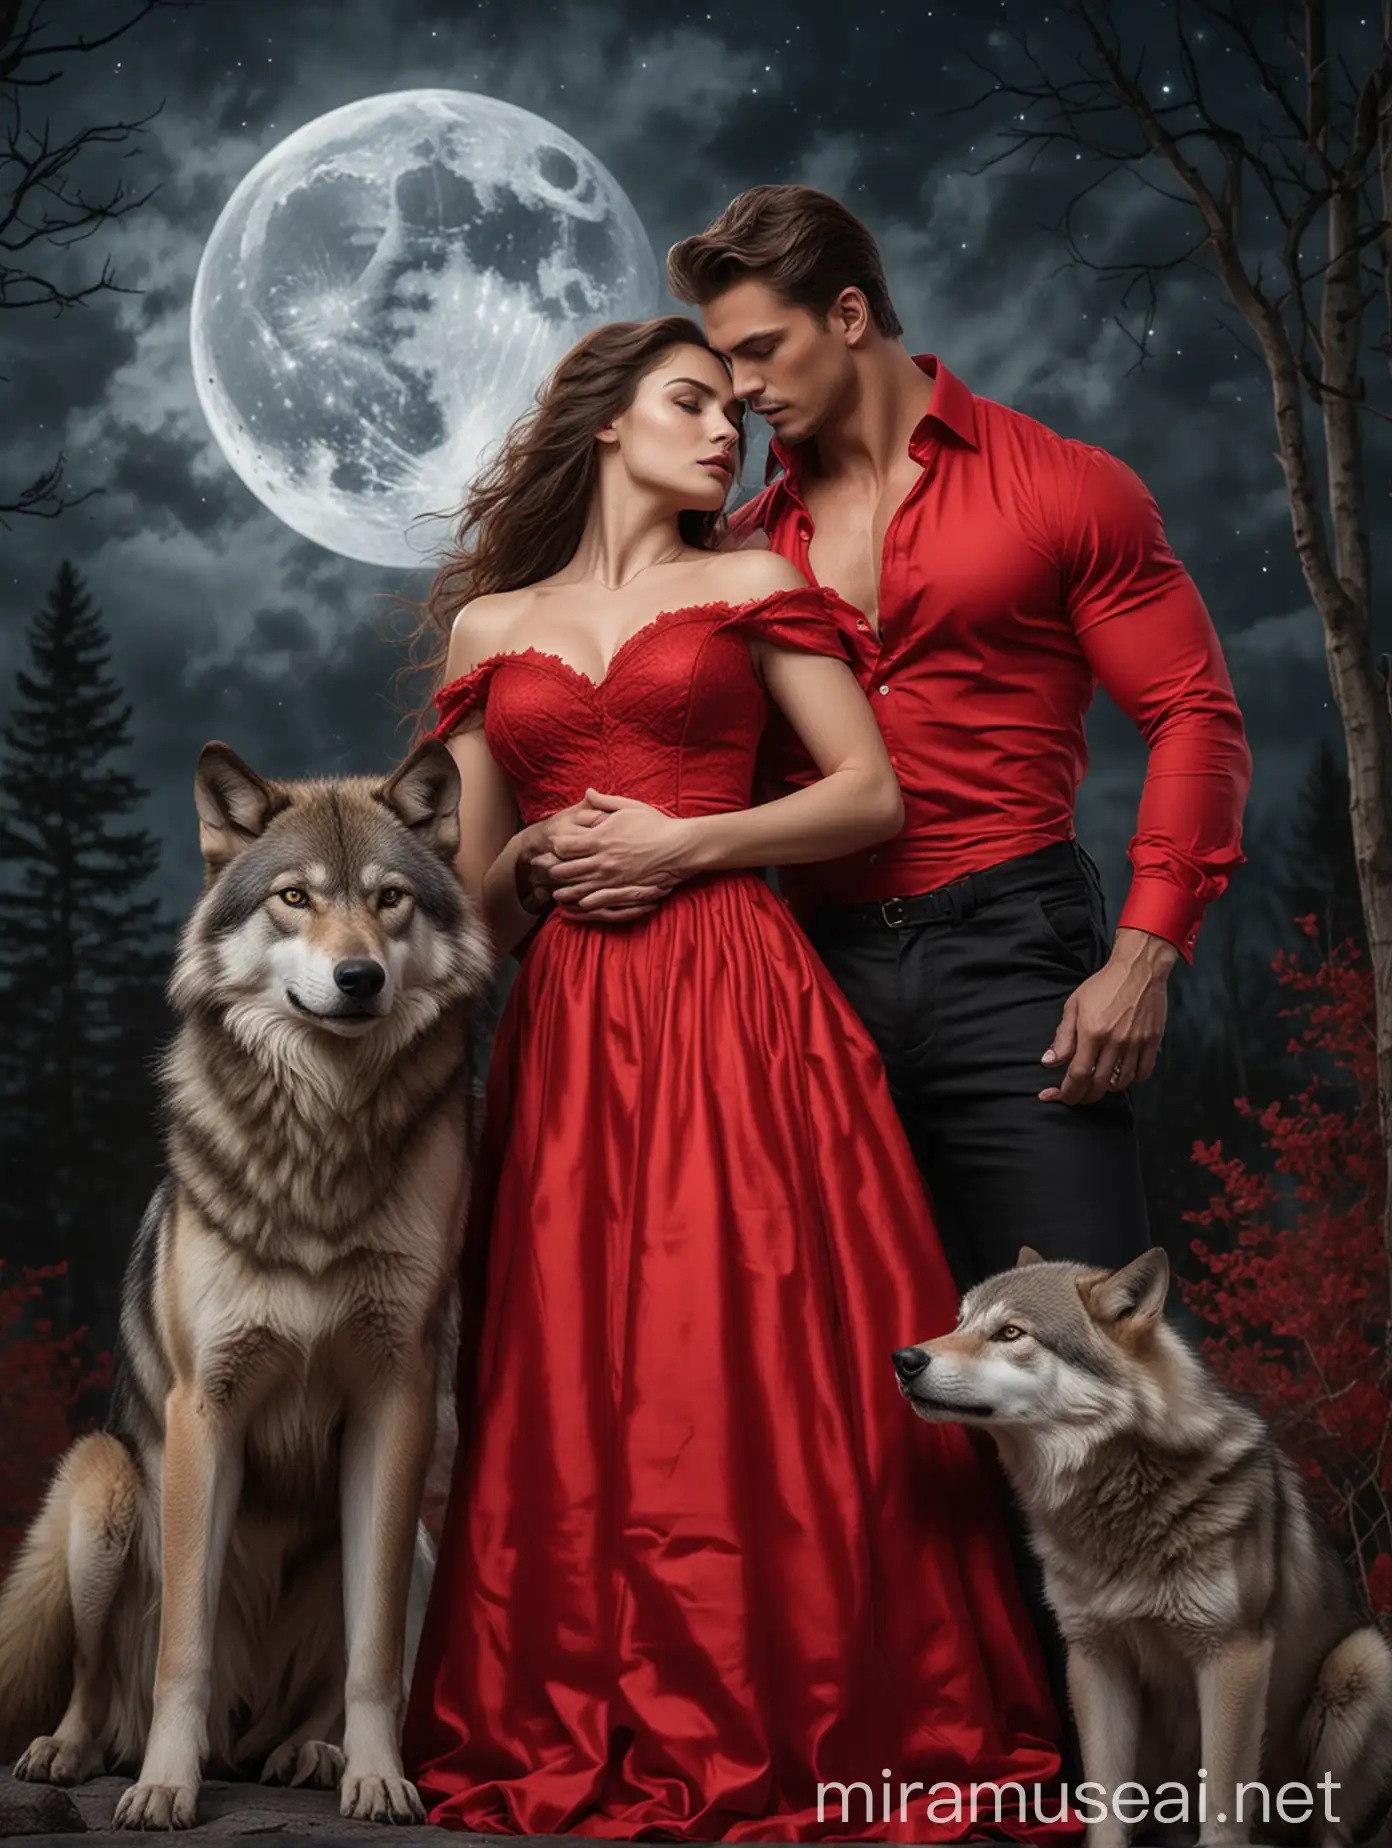 Romantic Couple in Red Dress with Wolves Under Moonlight